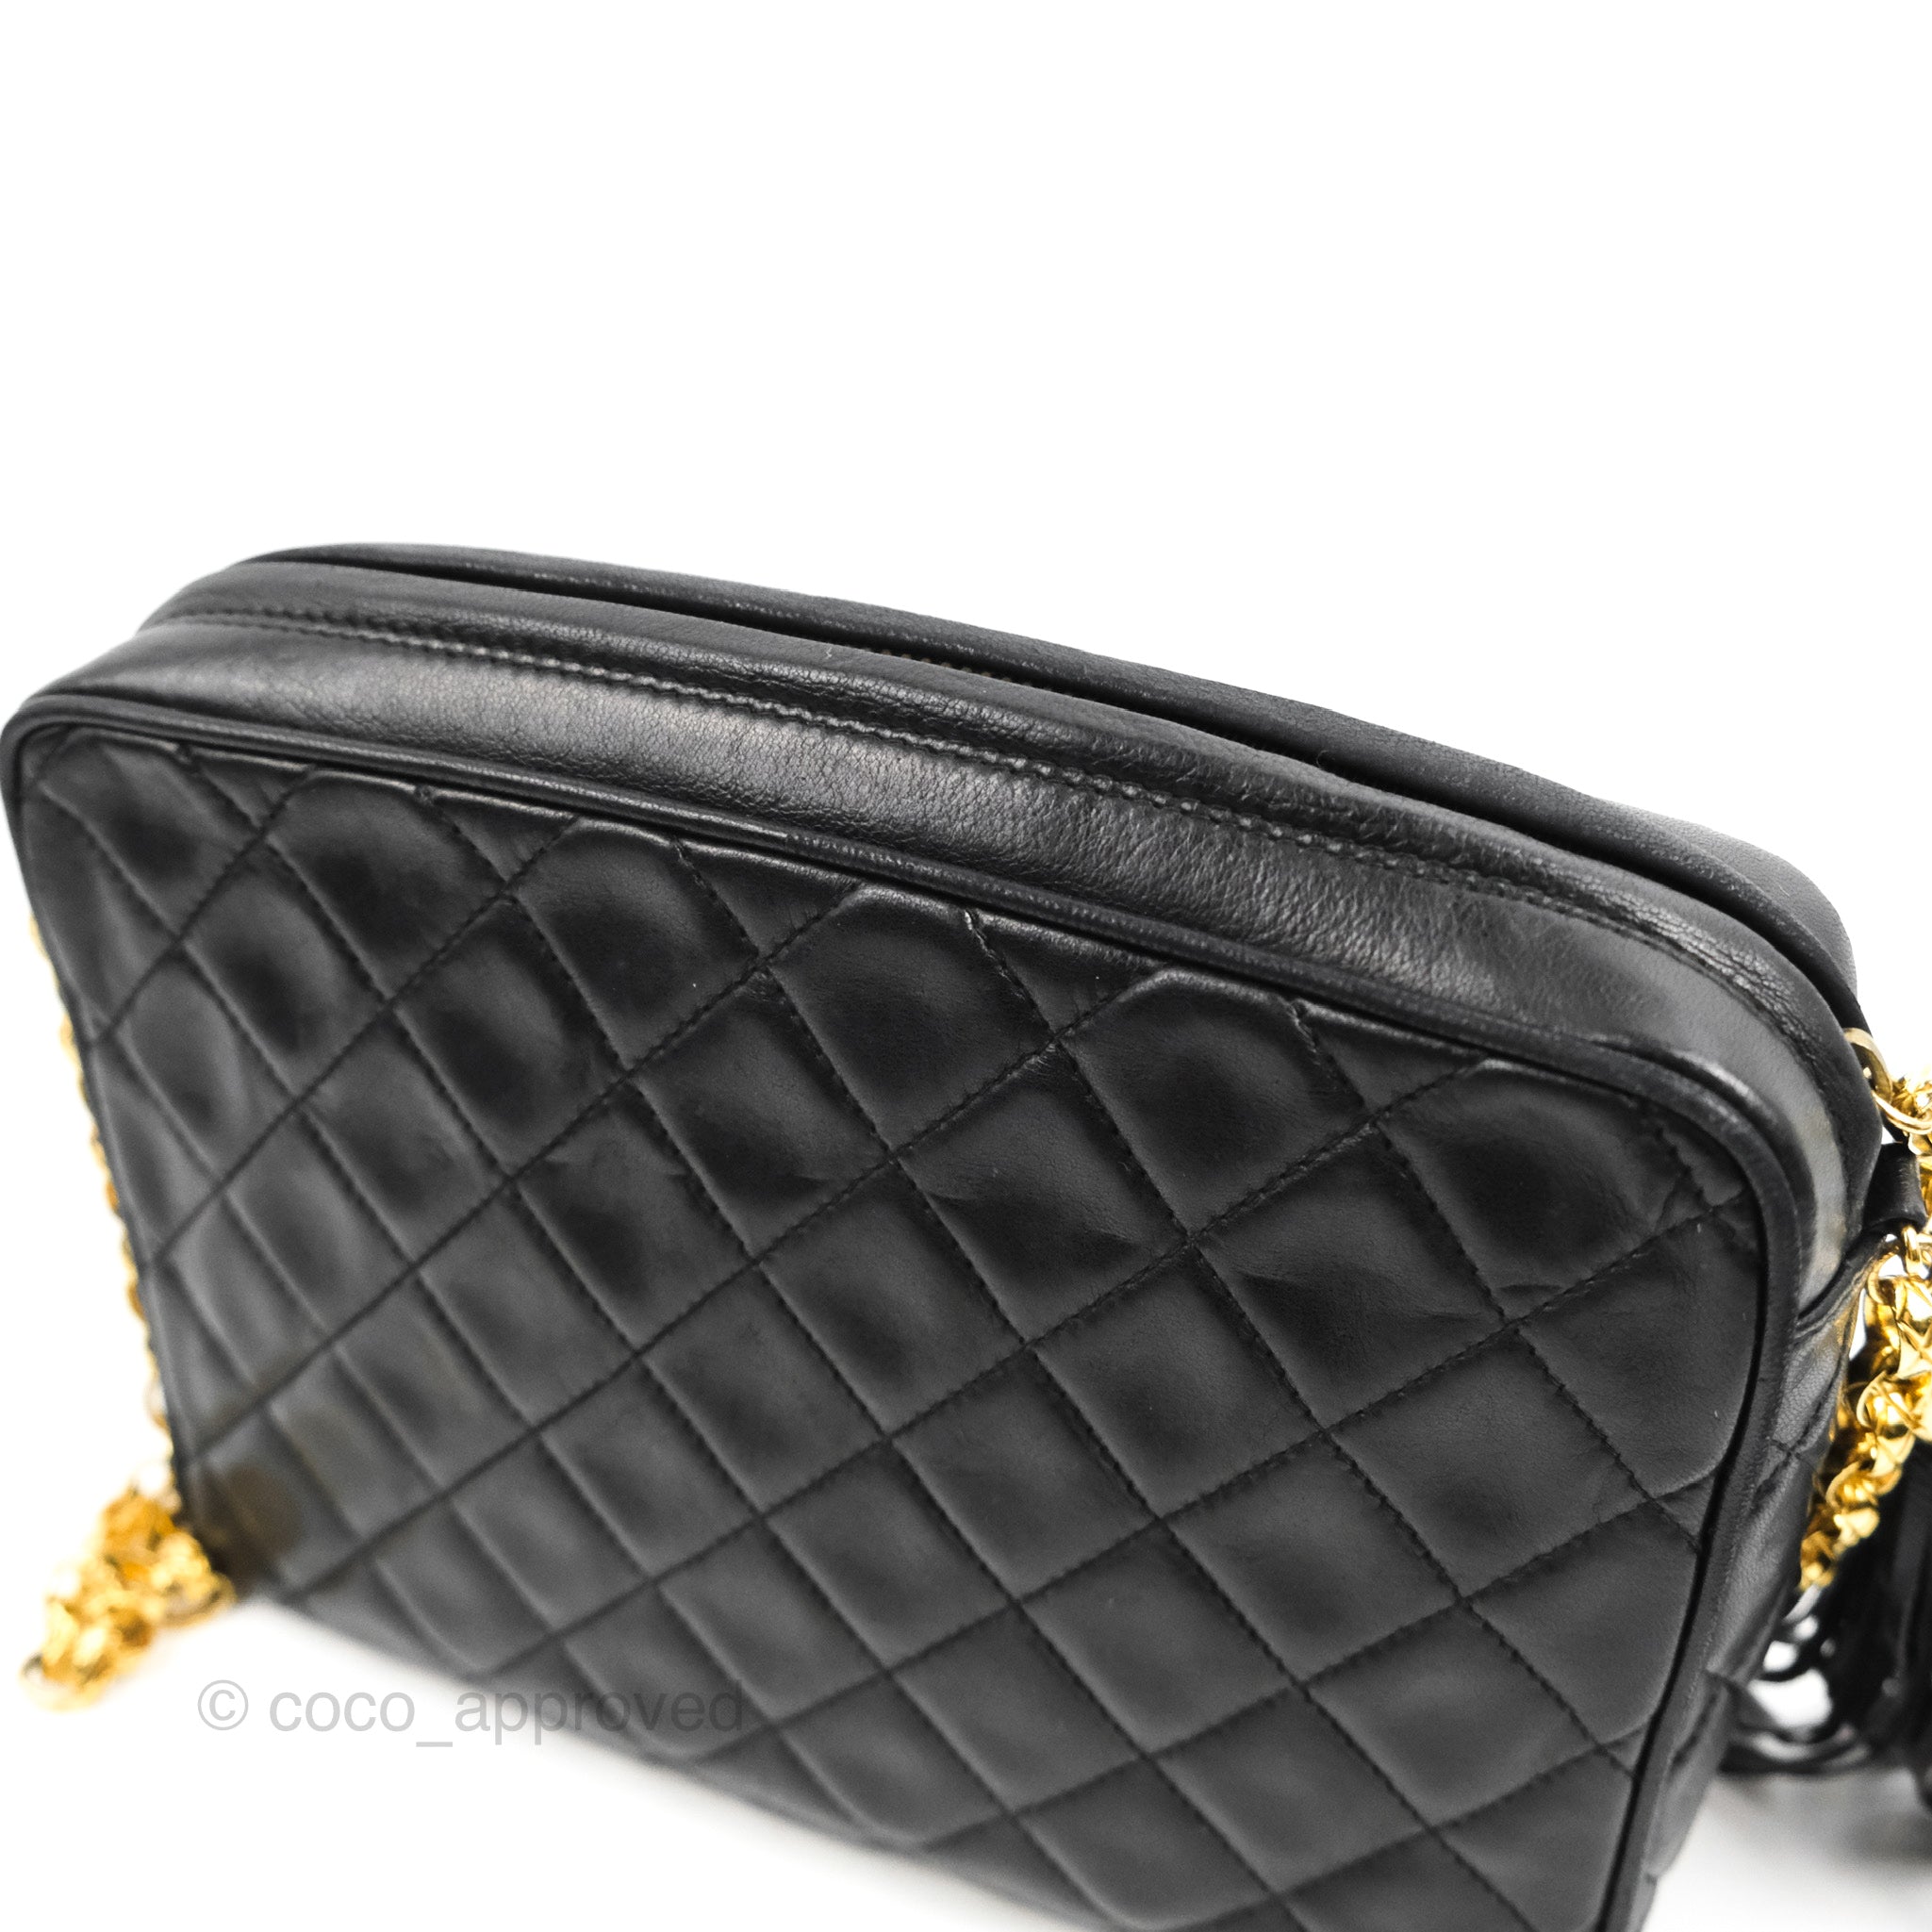 Chanel Reissue 225 Double Flap Bag in Matte Gold Python